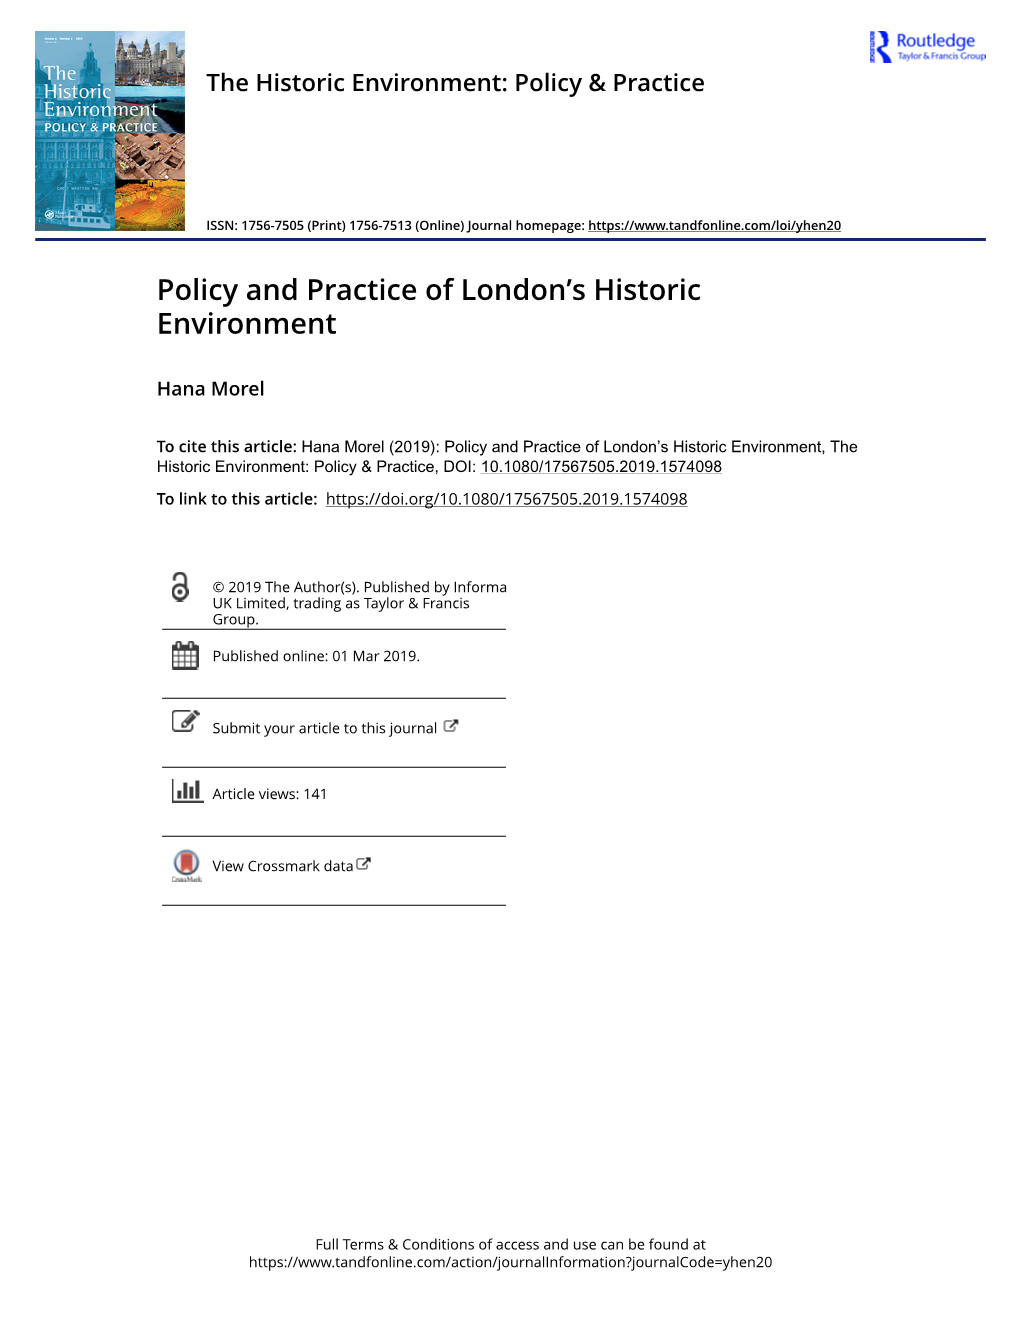 Policy and Practice of London's Historic Environment